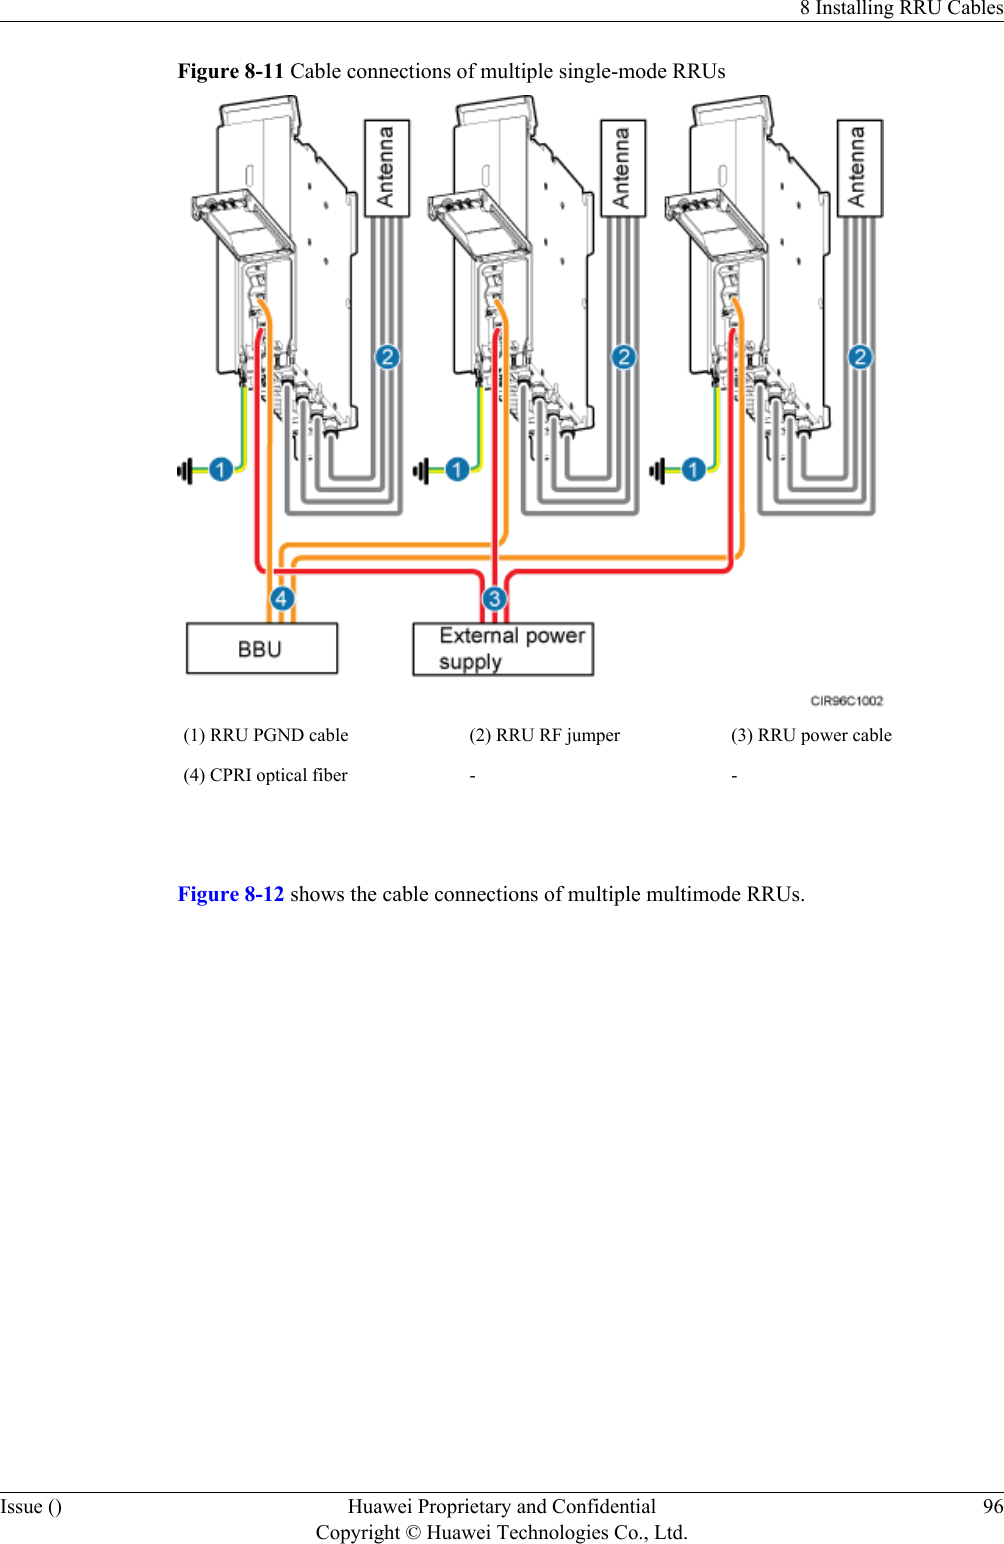 Figure 8-11 Cable connections of multiple single-mode RRUs(1) RRU PGND cable (2) RRU RF jumper (3) RRU power cable(4) CPRI optical fiber - - Figure 8-12 shows the cable connections of multiple multimode RRUs.8 Installing RRU CablesIssue () Huawei Proprietary and ConfidentialCopyright © Huawei Technologies Co., Ltd.96